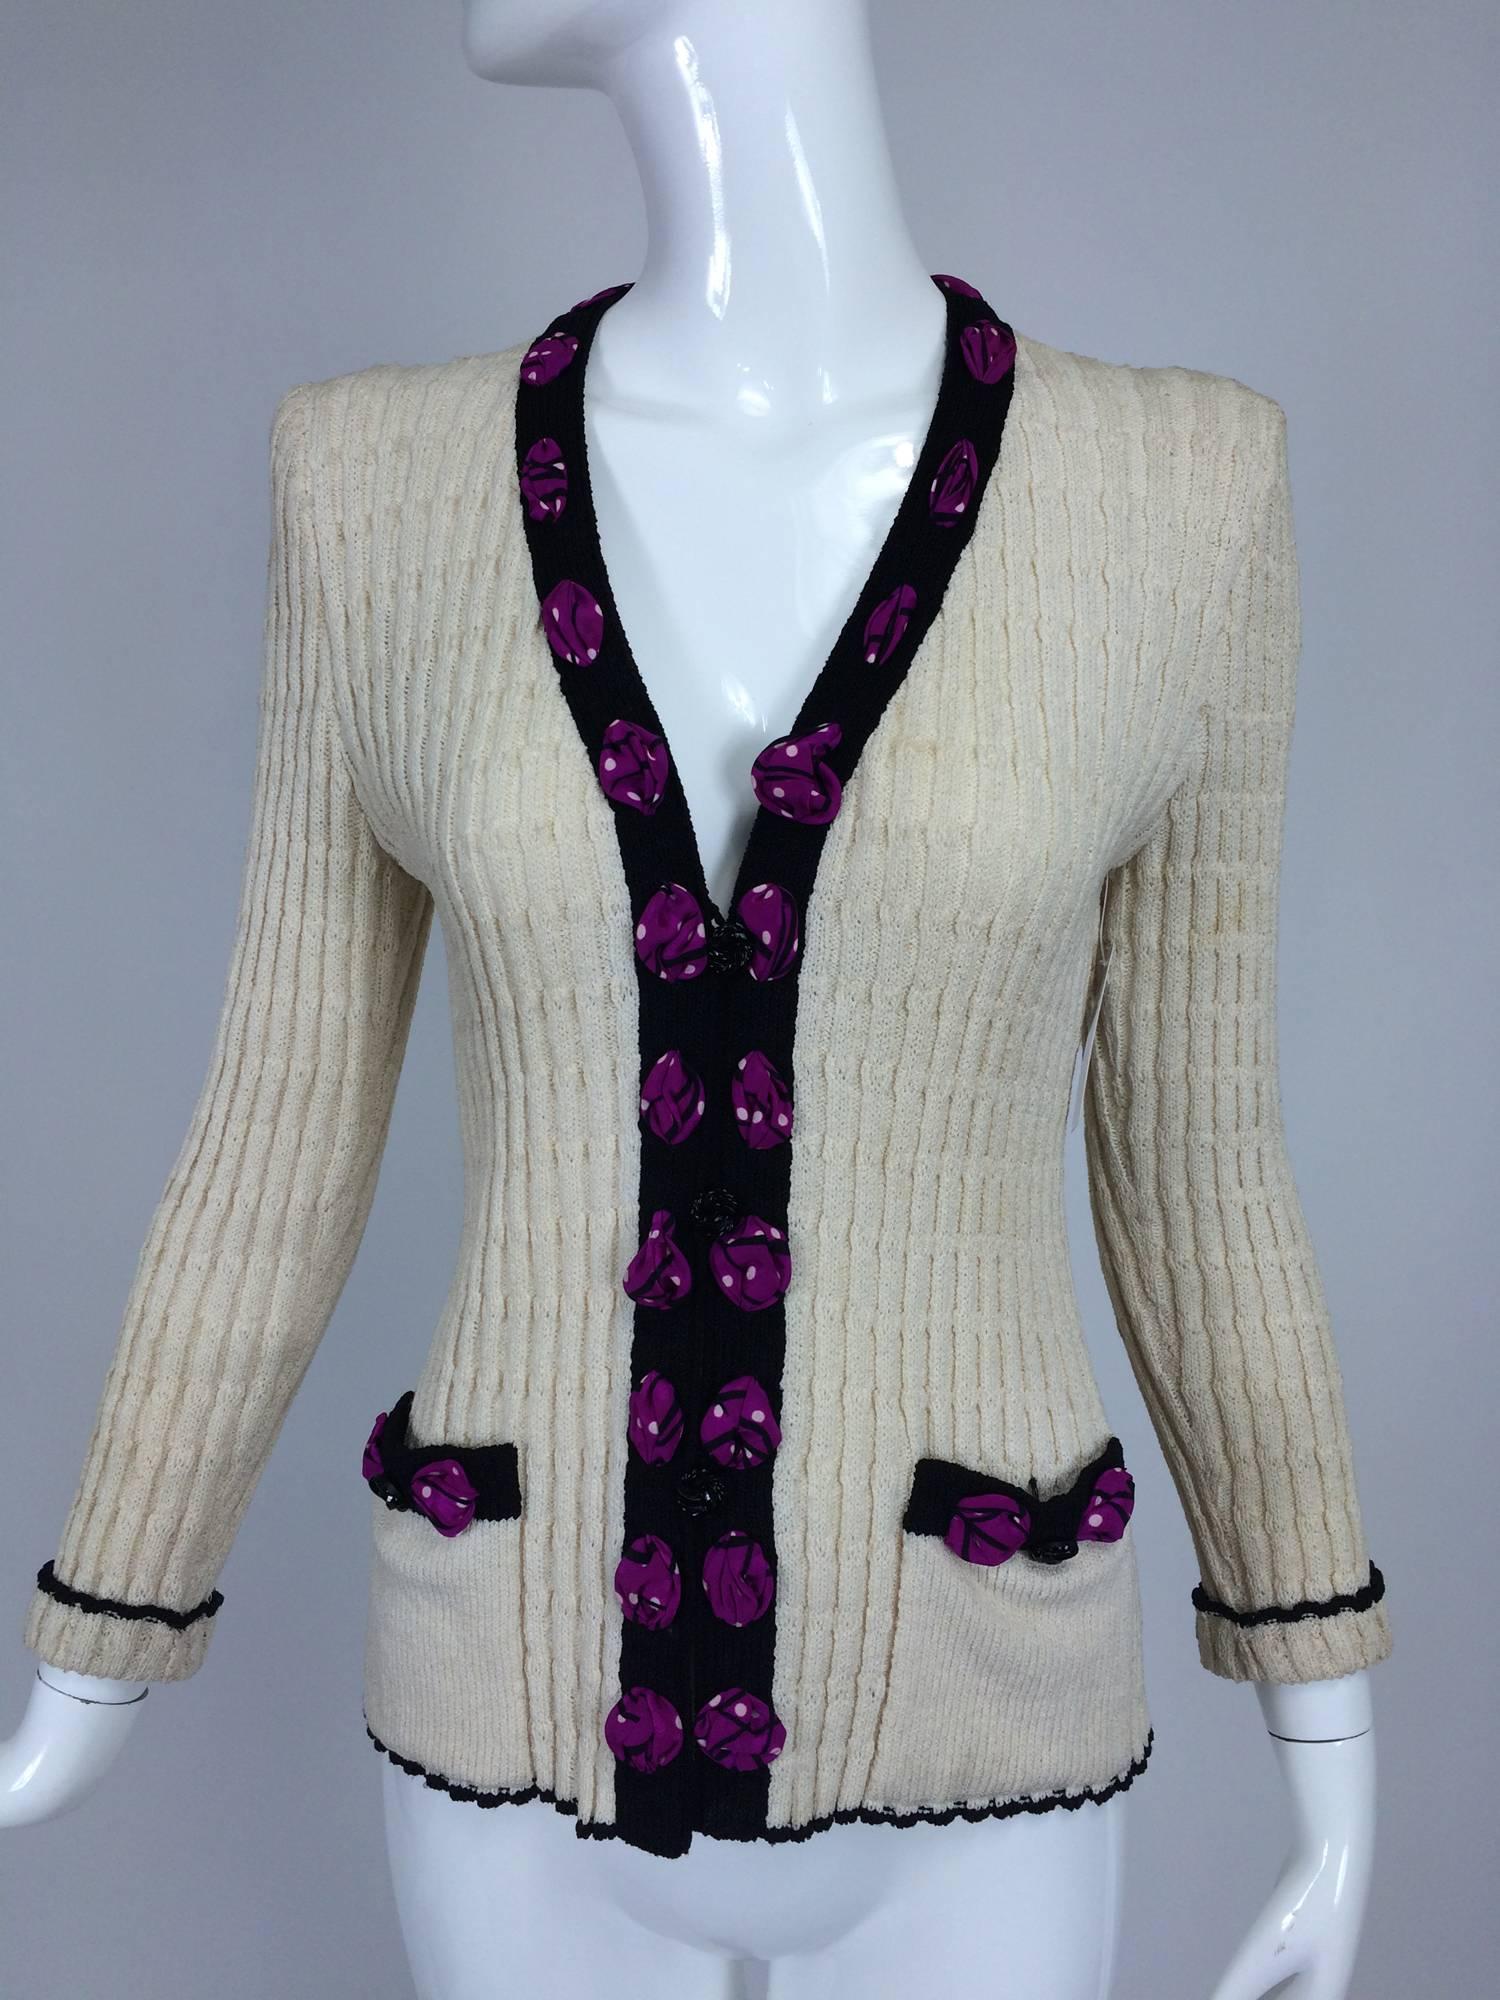 Adolfo cream cable knit rosette trimmed cardigan sweater/jacket 1970s 5